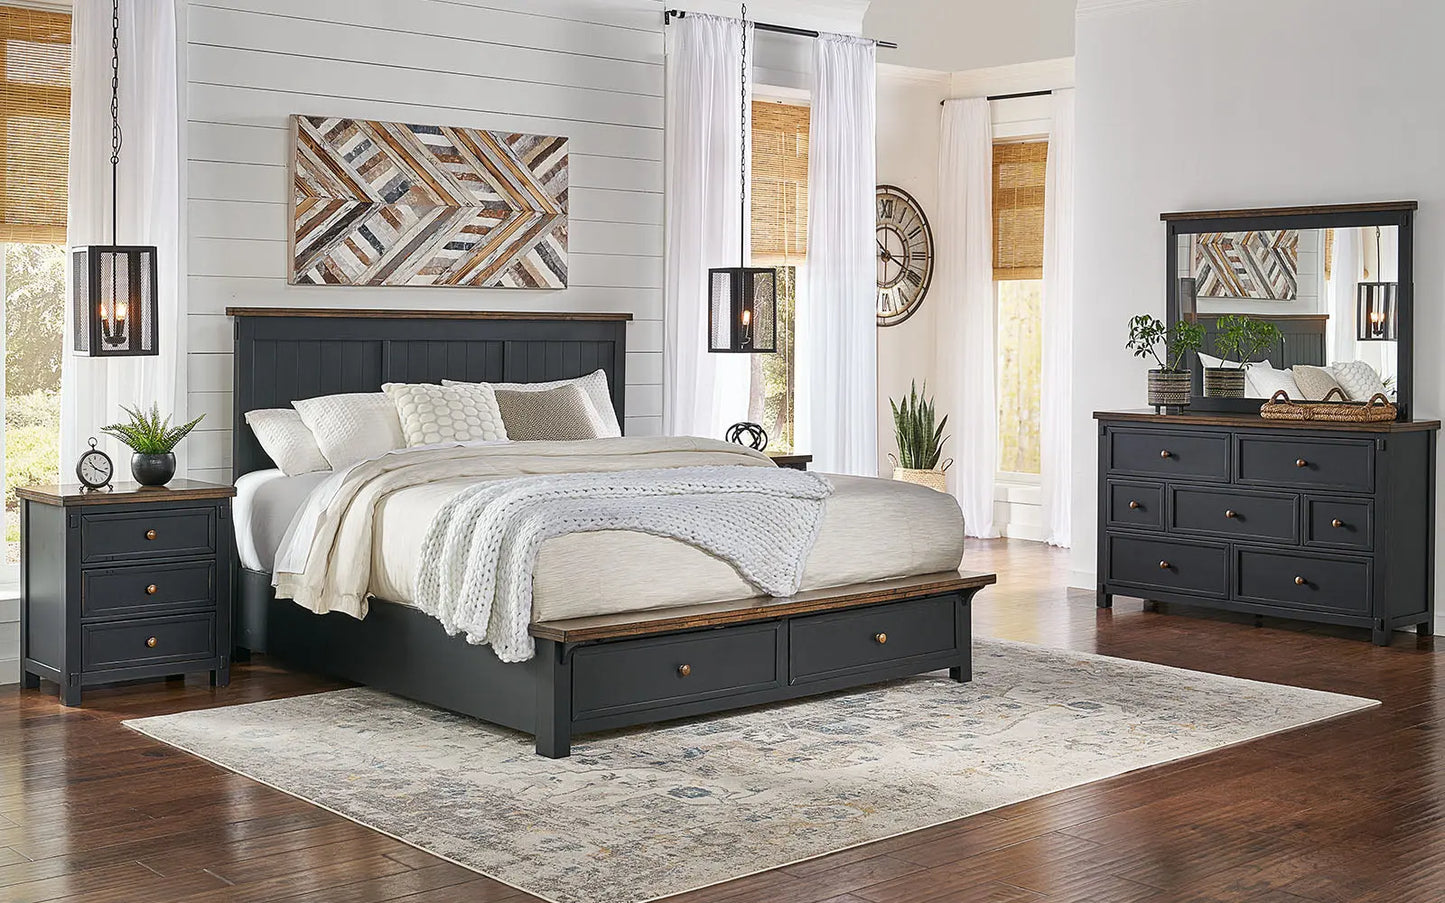 Stormy Ridge Bedroom Cal King Storage Bed A-America